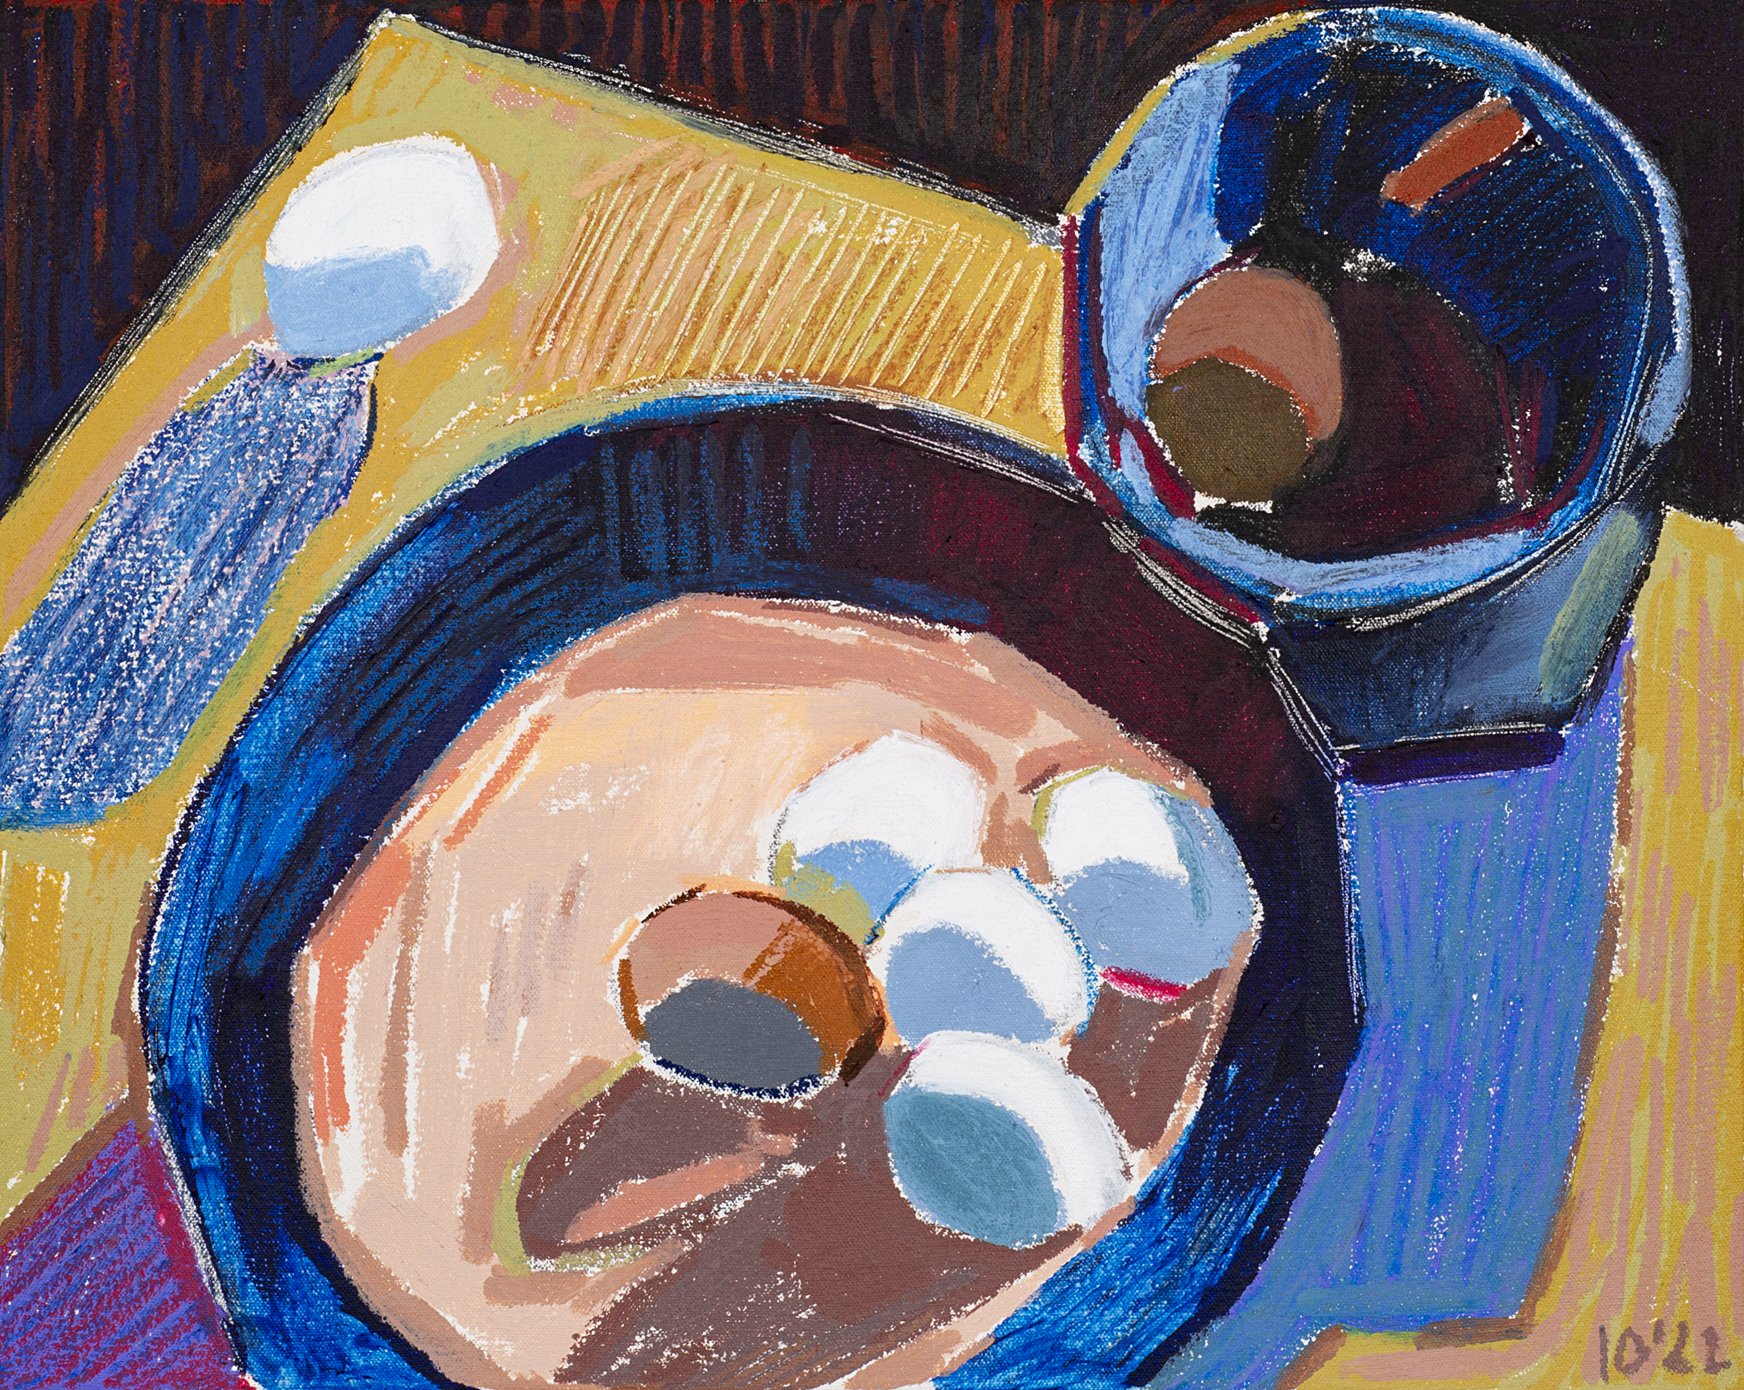 Still Life with Eggs and Blue Dishes, 2022 - tempera sticks on primed canvas, 20x16in